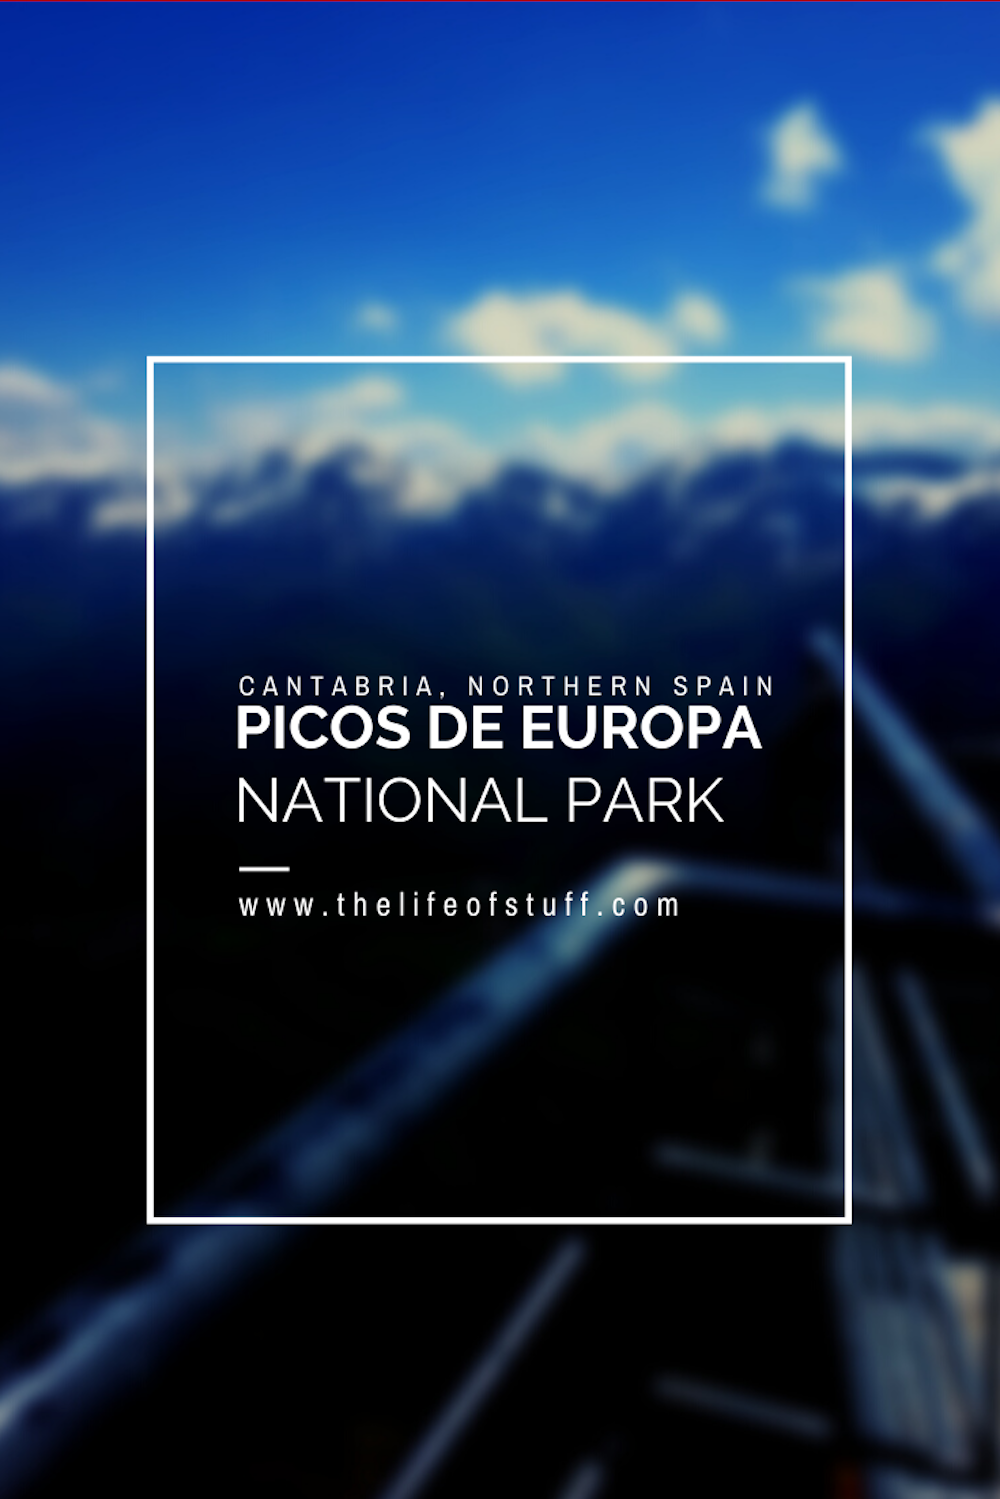 Picos de Europa National Park, Cantabria, Northern Spain - The Life of Stuff